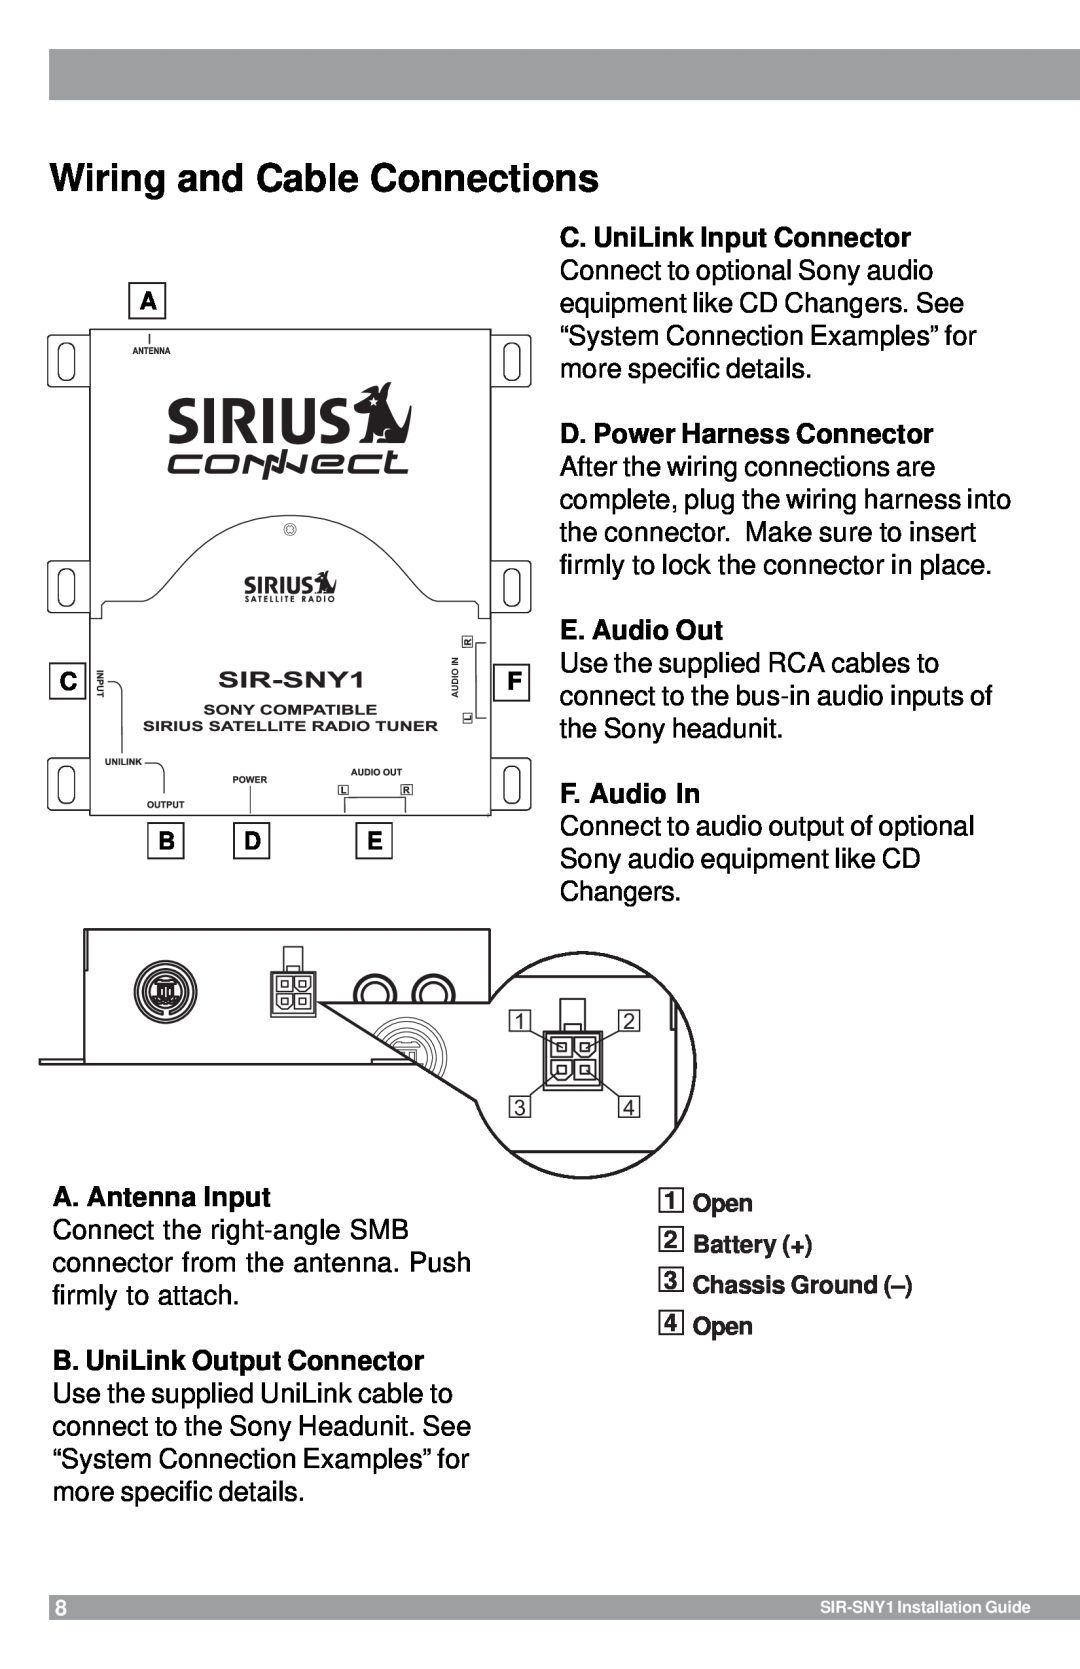 Sirius Satellite Radio SIR-SNY1 manual Wiring and Cable Connections 